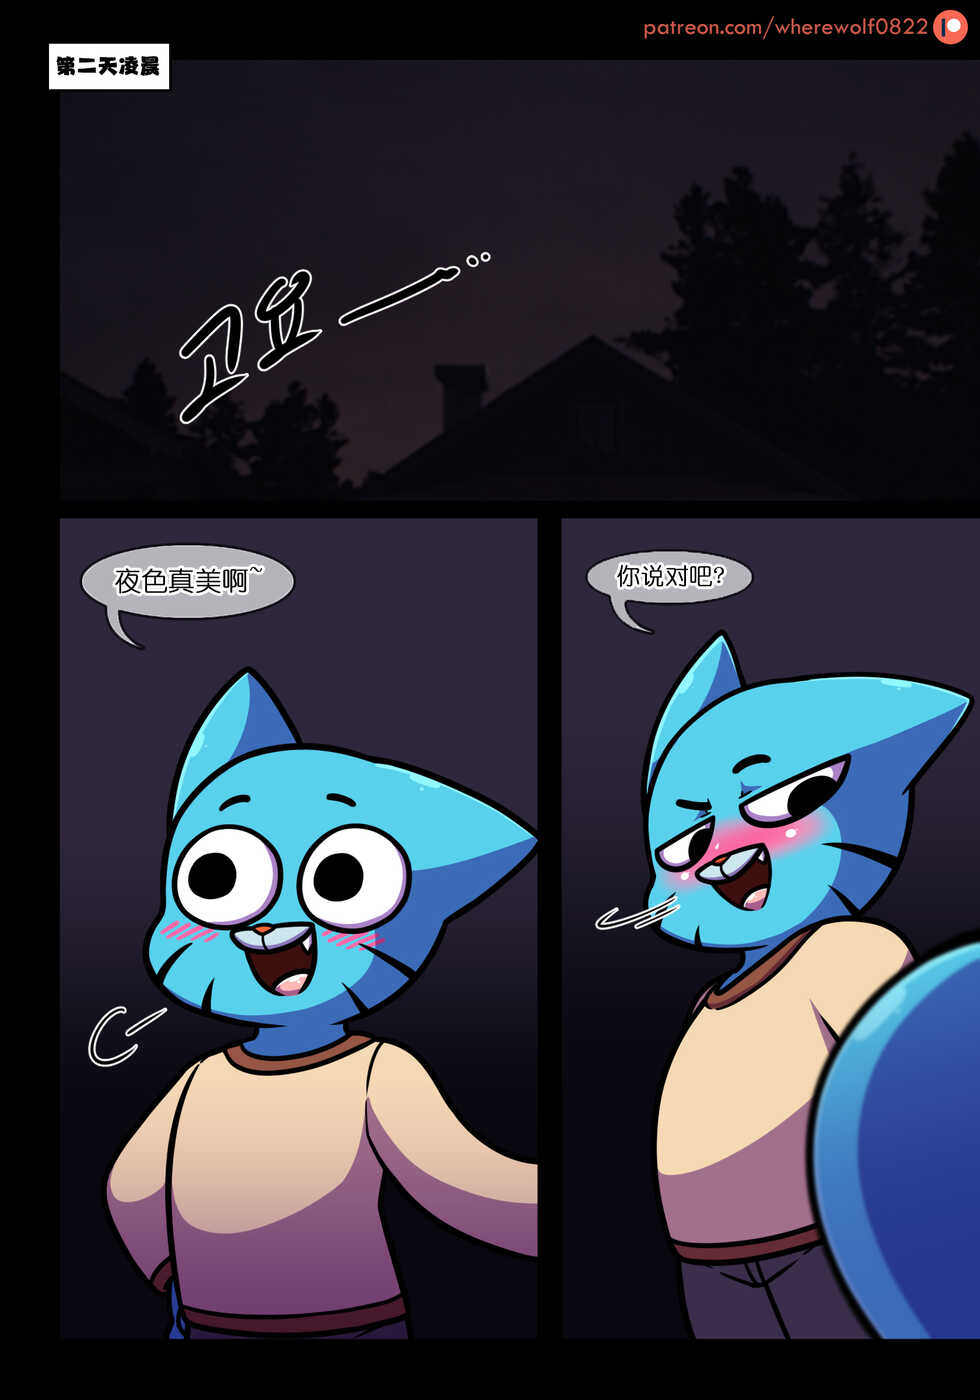 [Wherewolf] Lusty World of Nicole Ep. 5 - Controller pet [CN] - Page 7